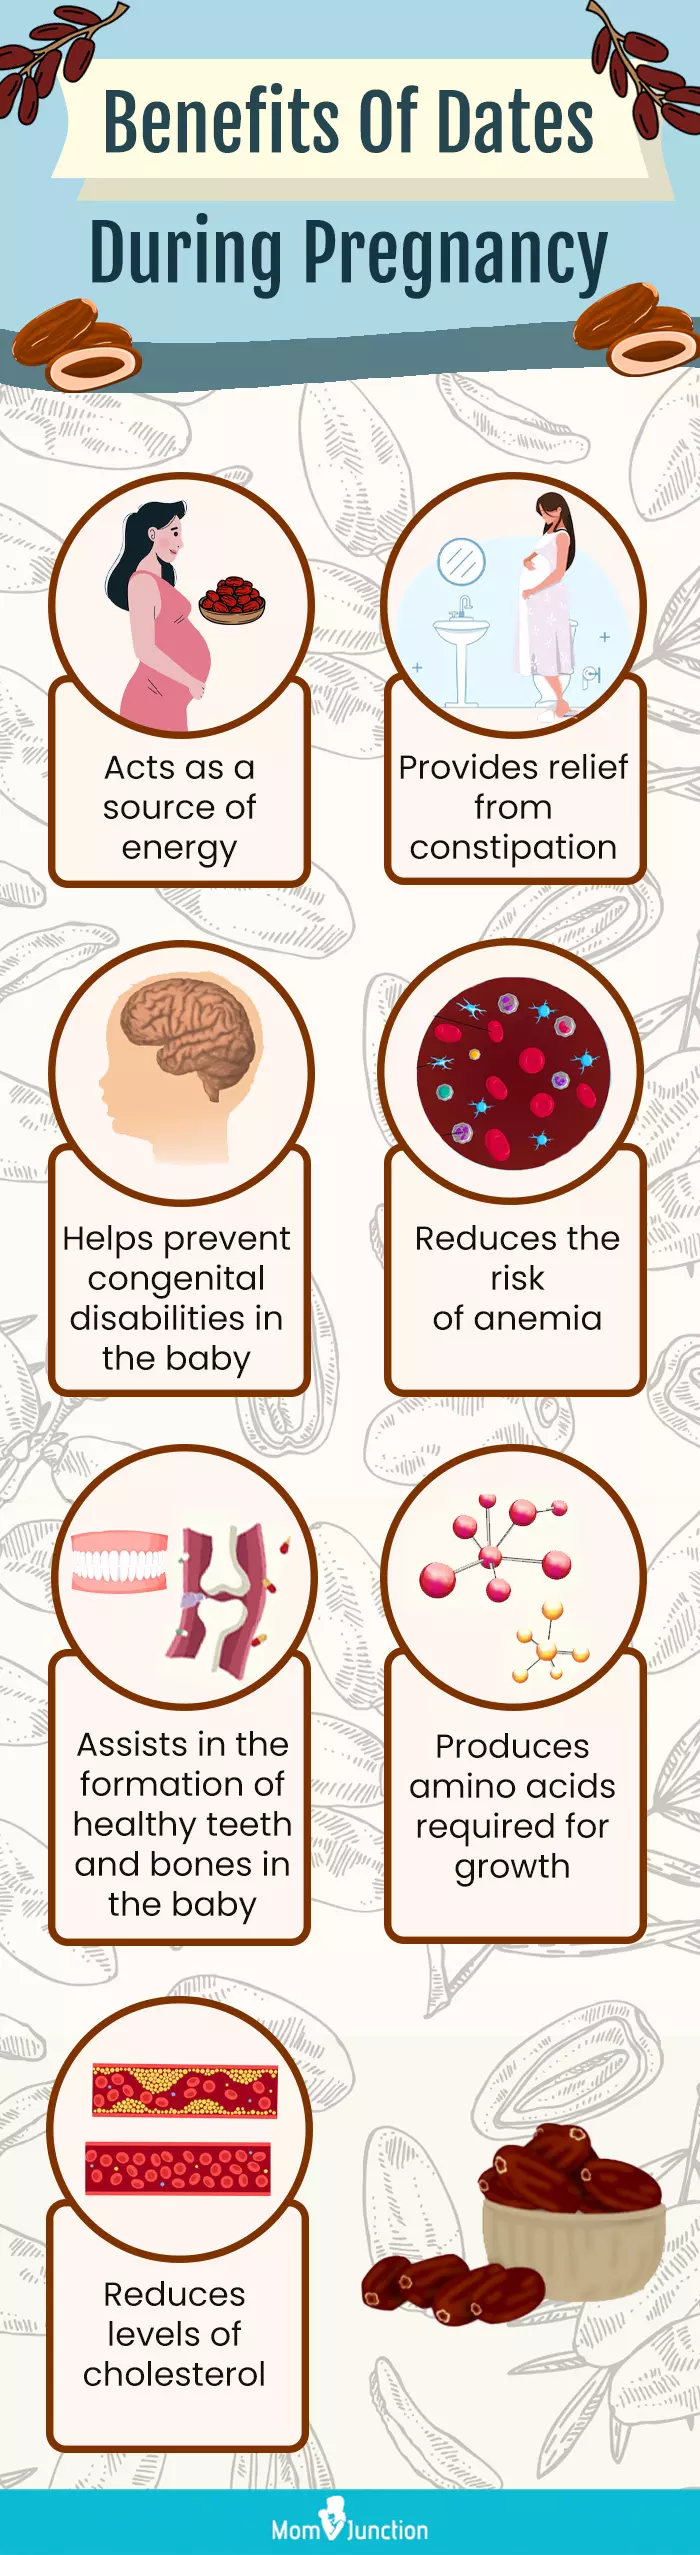 benefits of dates during pregnancy (infographic)